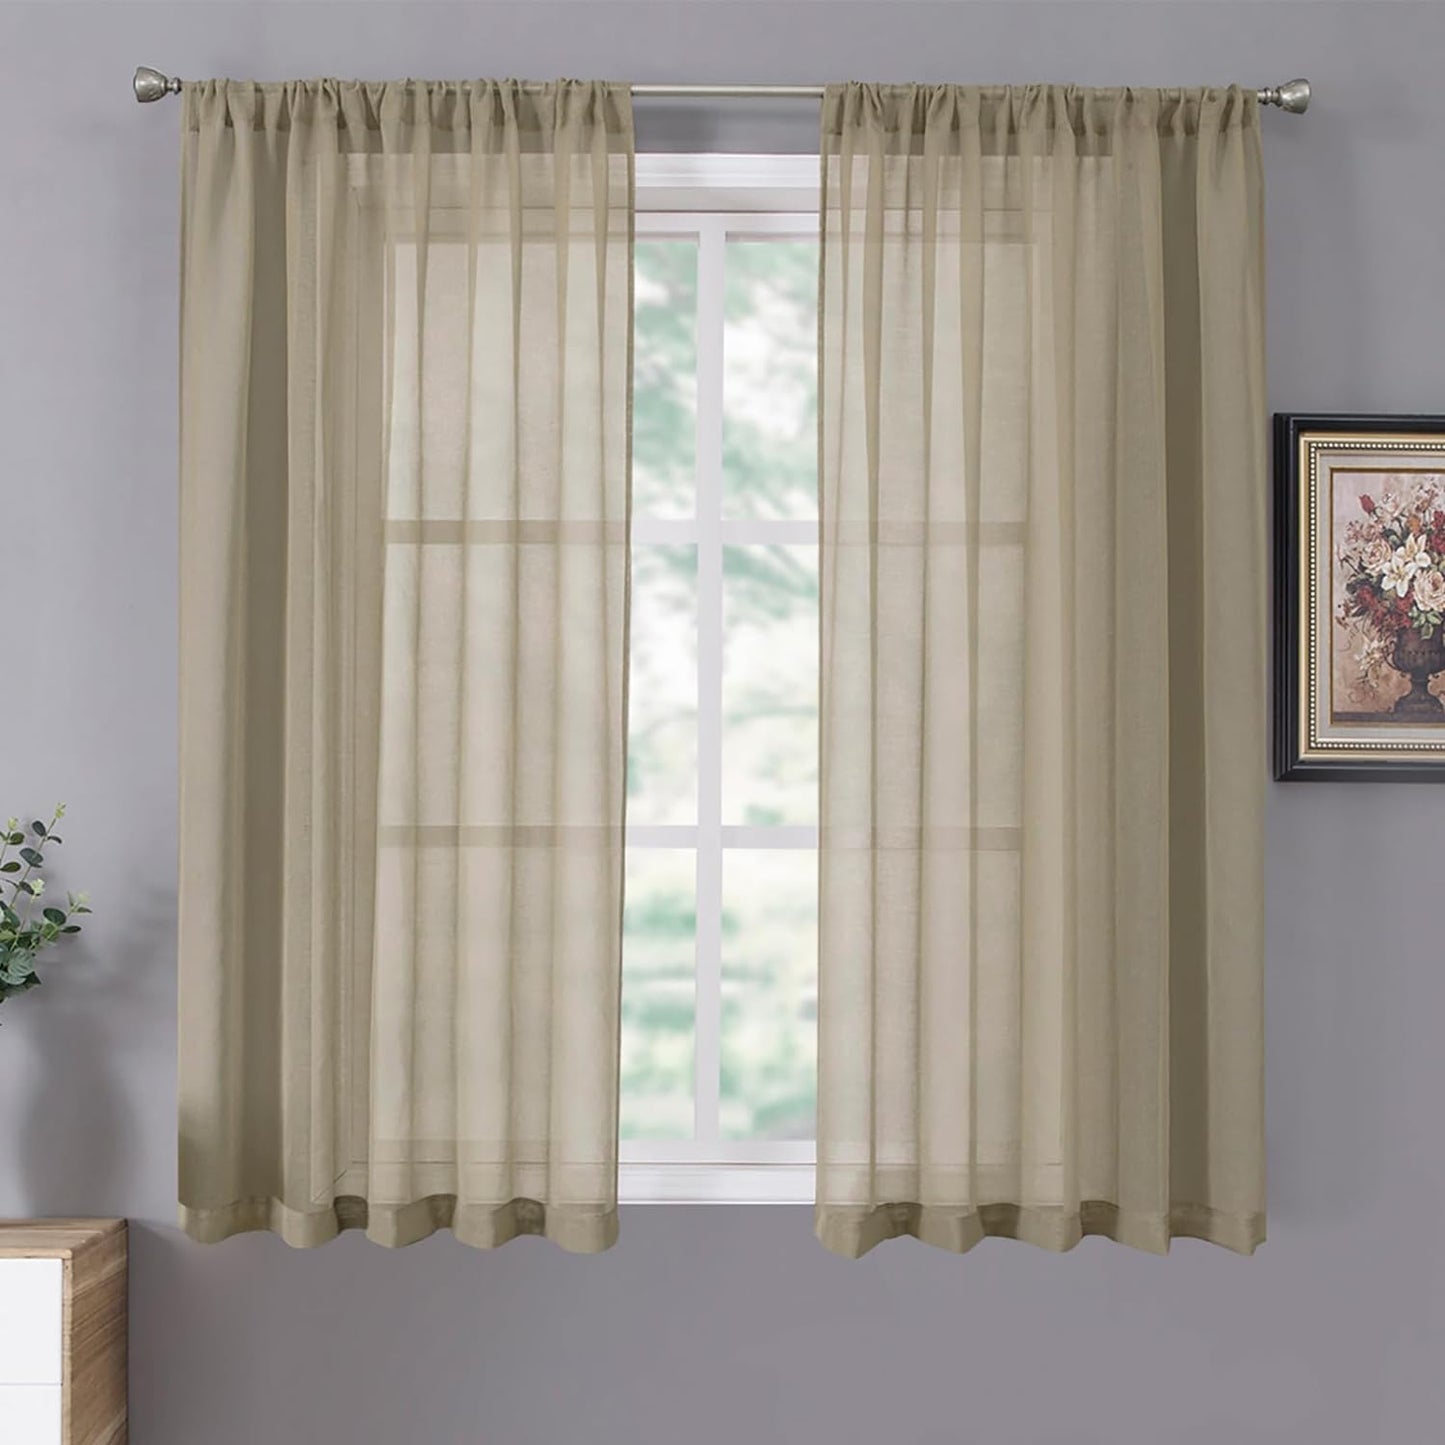 Tollpiz Short Sheer Curtains Linen Textured Bedroom Curtain Sheers Light Filtering Rod Pocket Voile Curtains for Living Room, 54 X 45 Inches Long, White, Set of 2 Panels  Tollpiz Tex Taos Taupe 42"W X 54"L 